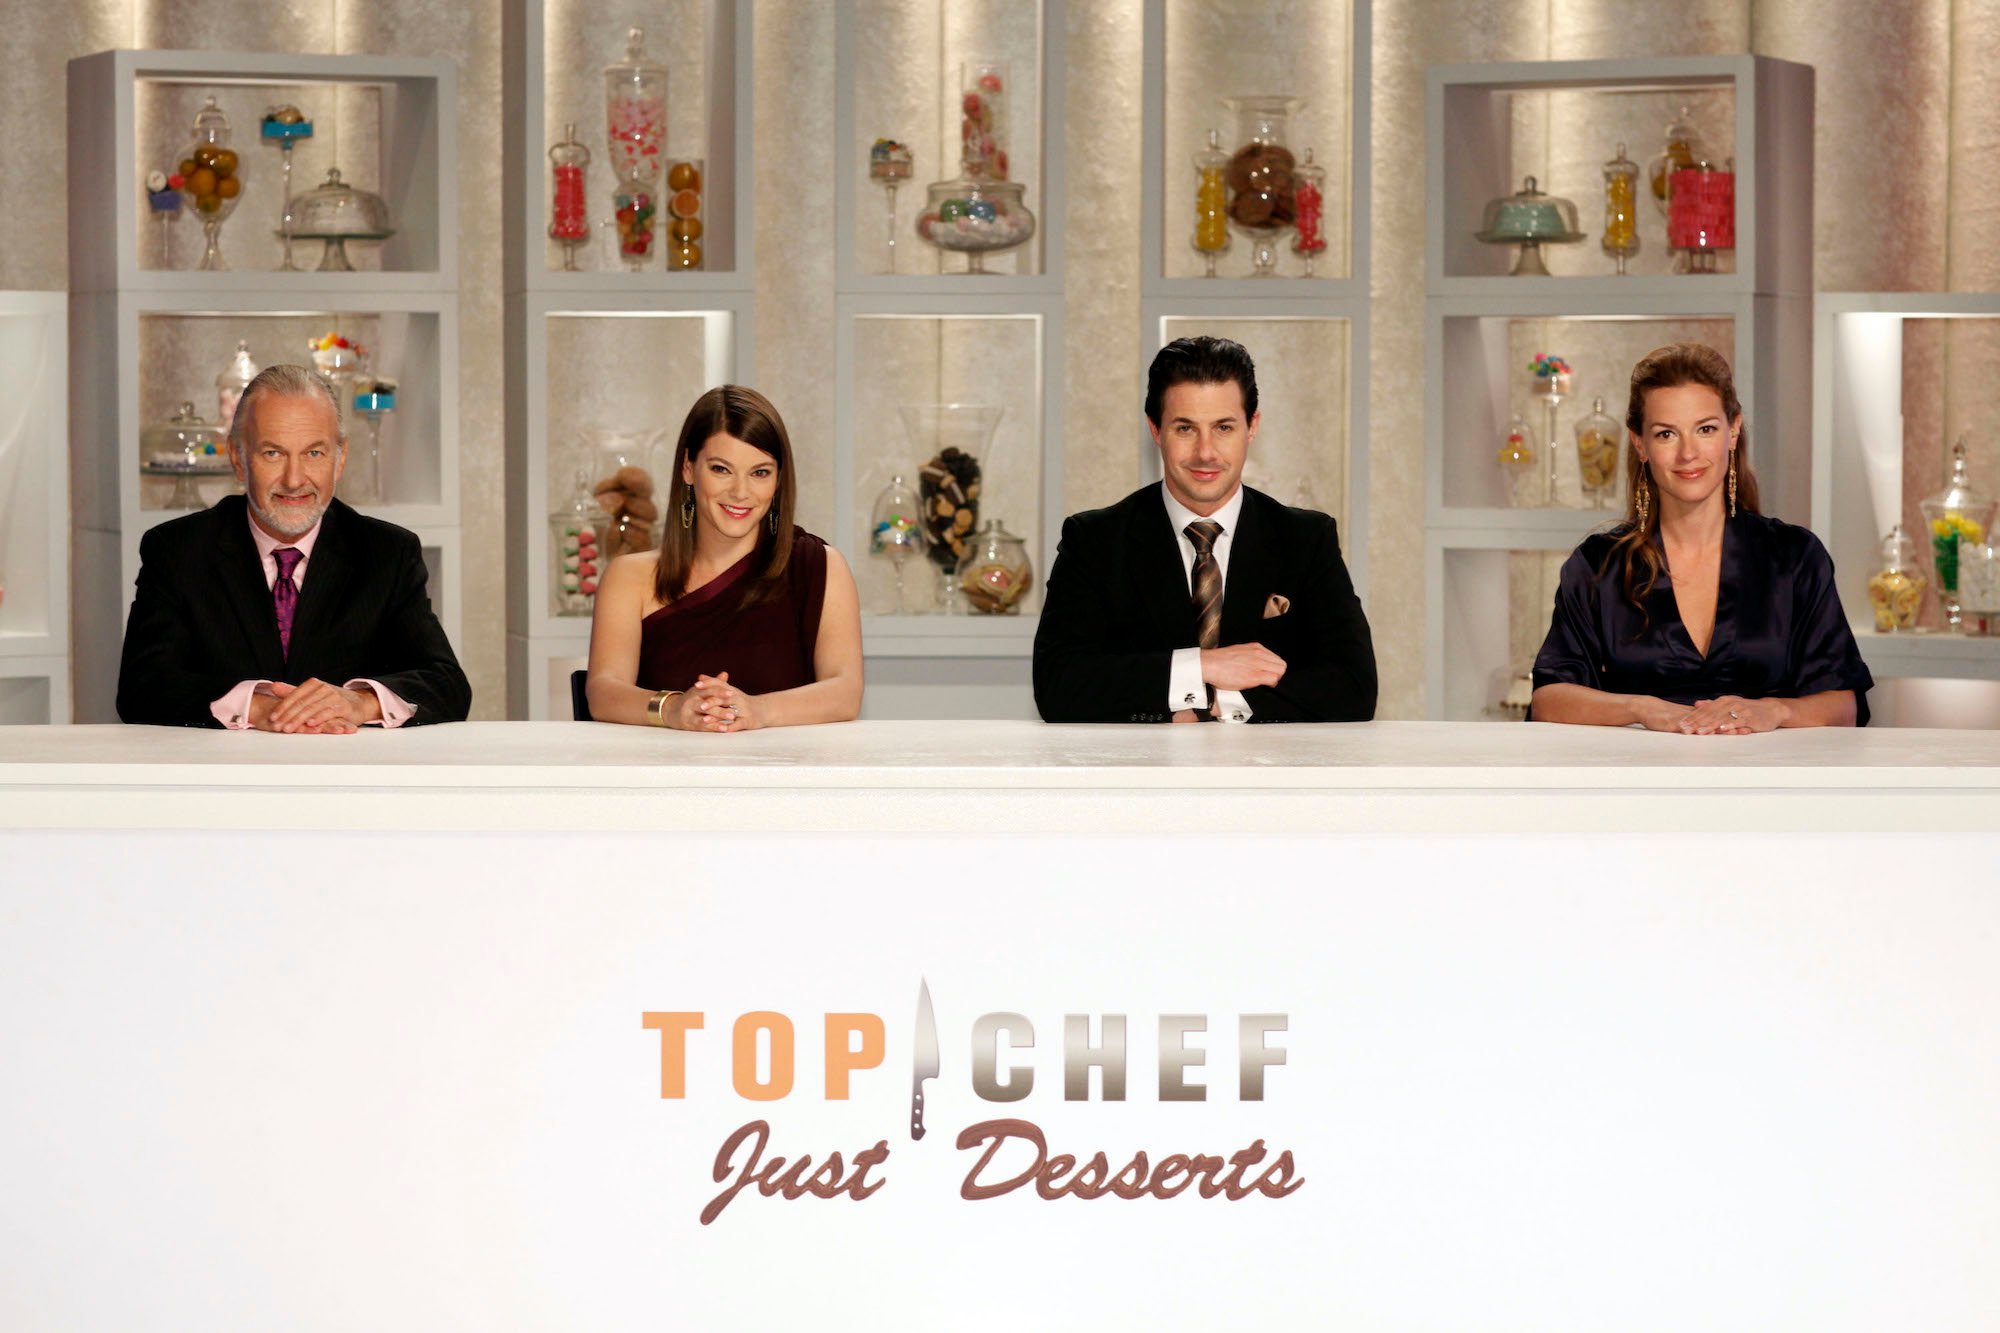 'Top Chef Just Desserts' judges, seated